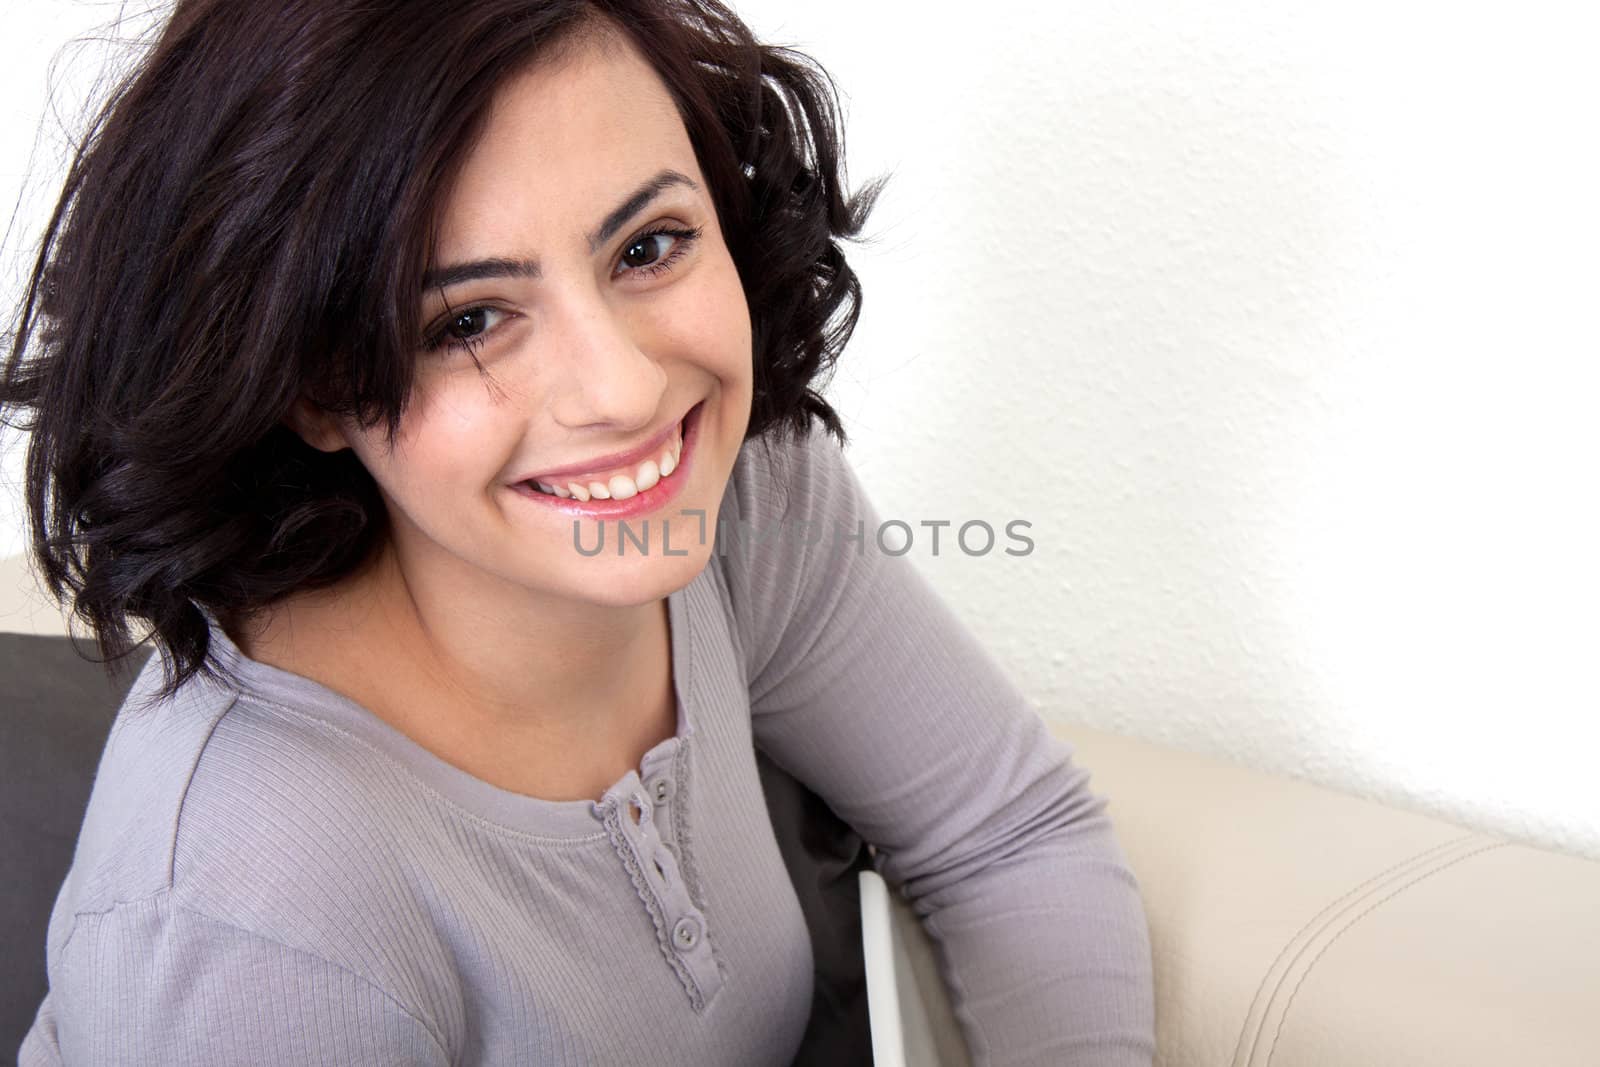 young beautiful woman is sitting an a sofa and relaxing